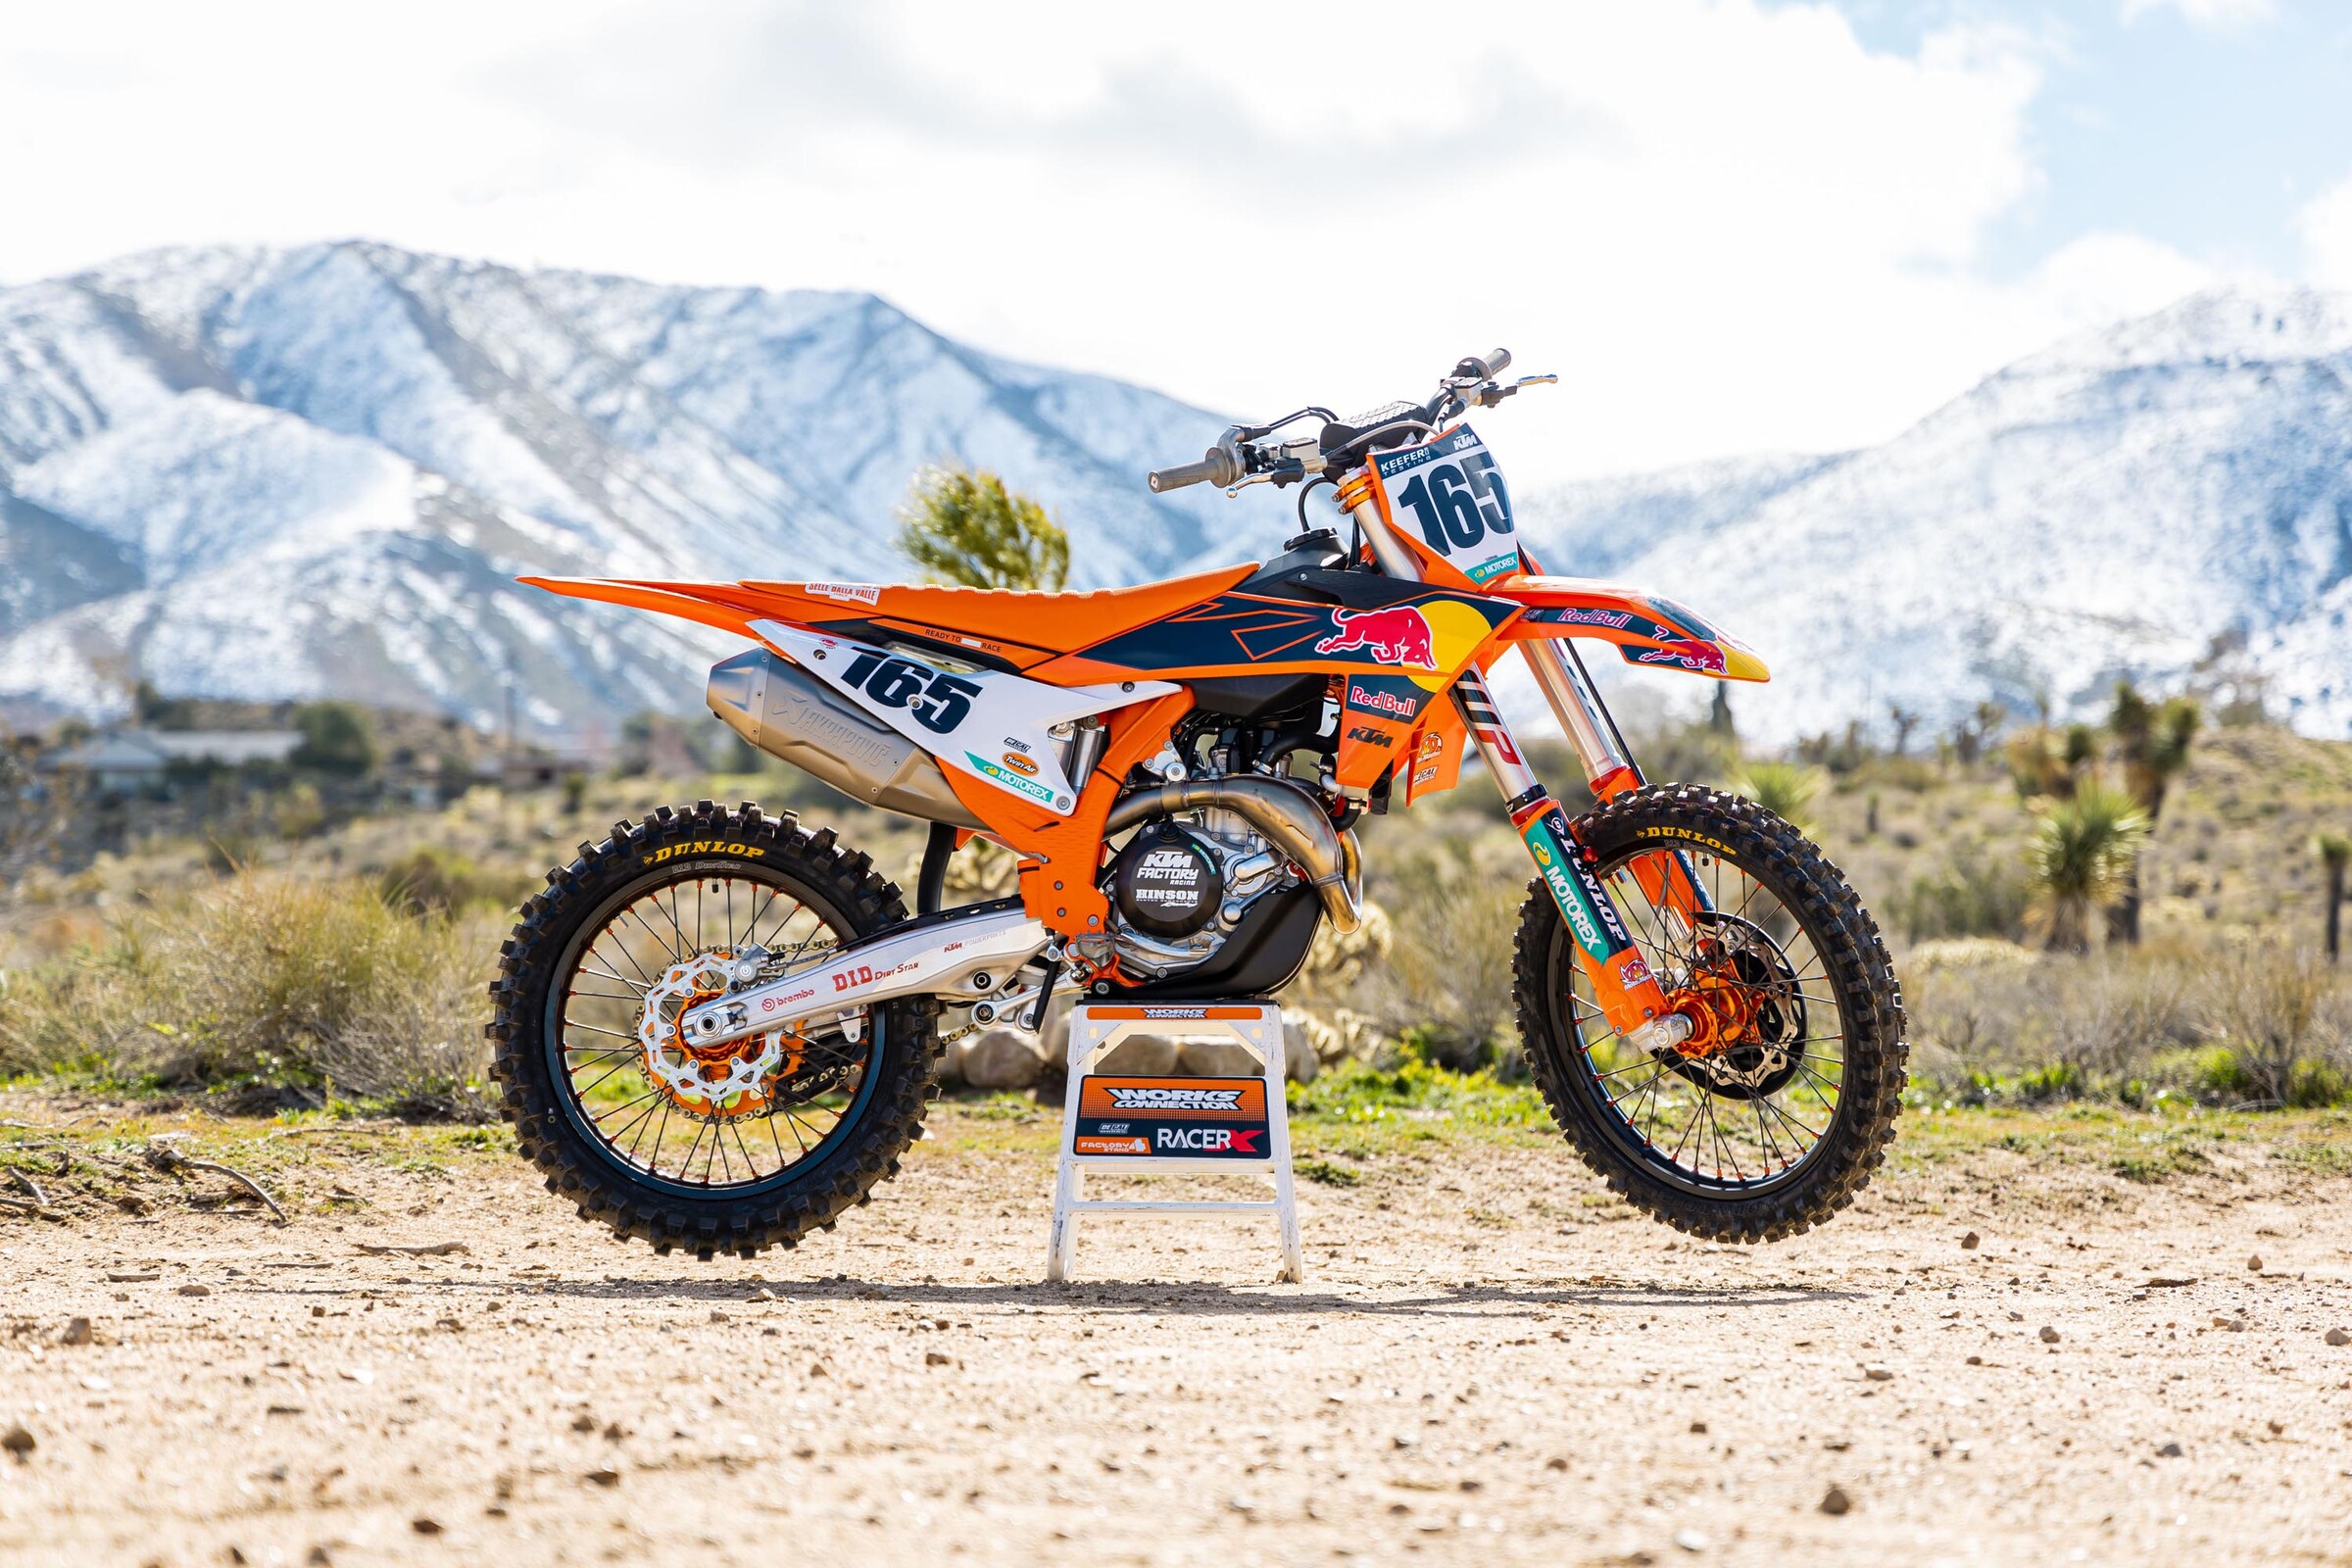 2023.5 KTM 450 SXF Factory Edition Review (Video) Keefer, Inc. Tested